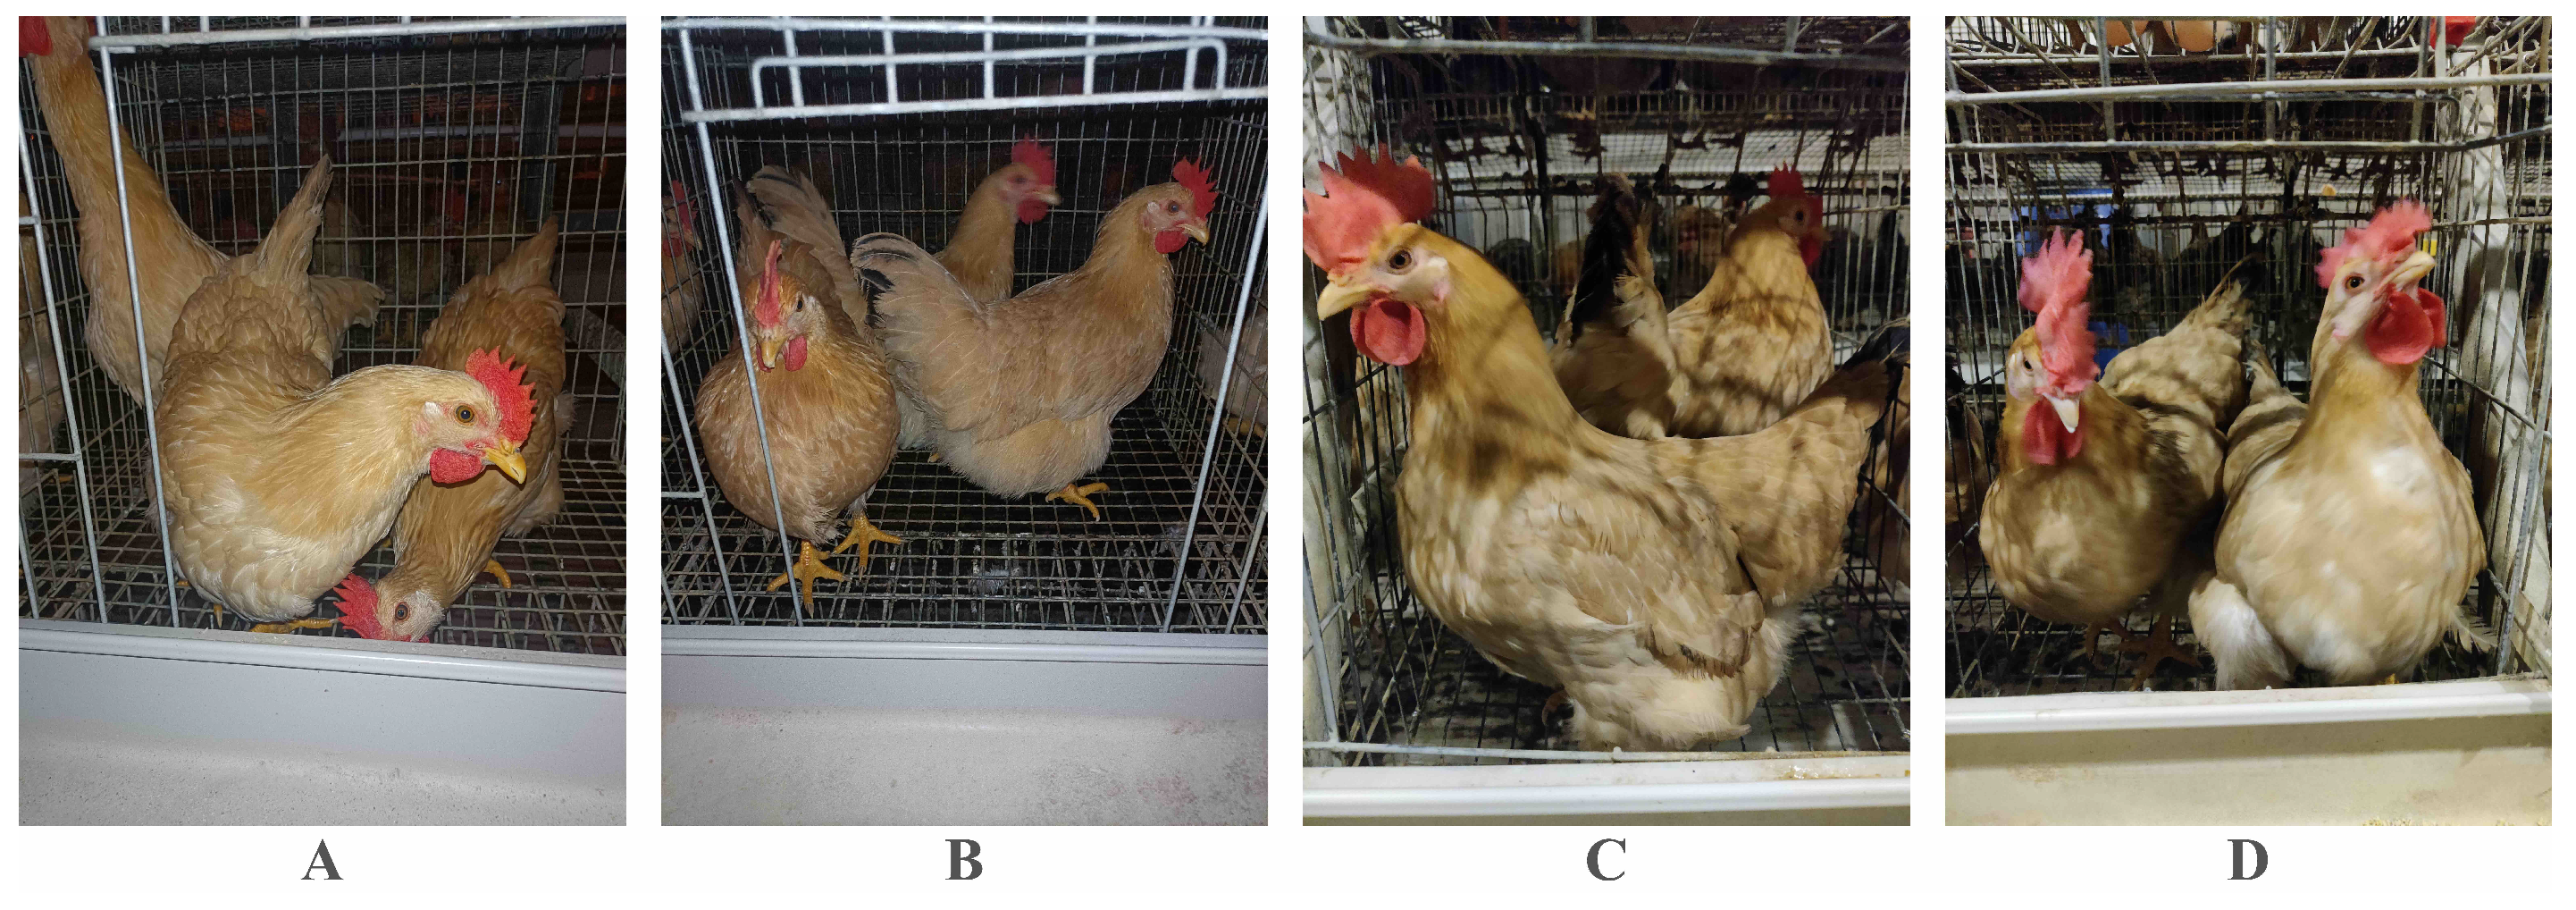 Animals | Free Full-Text | An Advanced Chicken Face Detection 